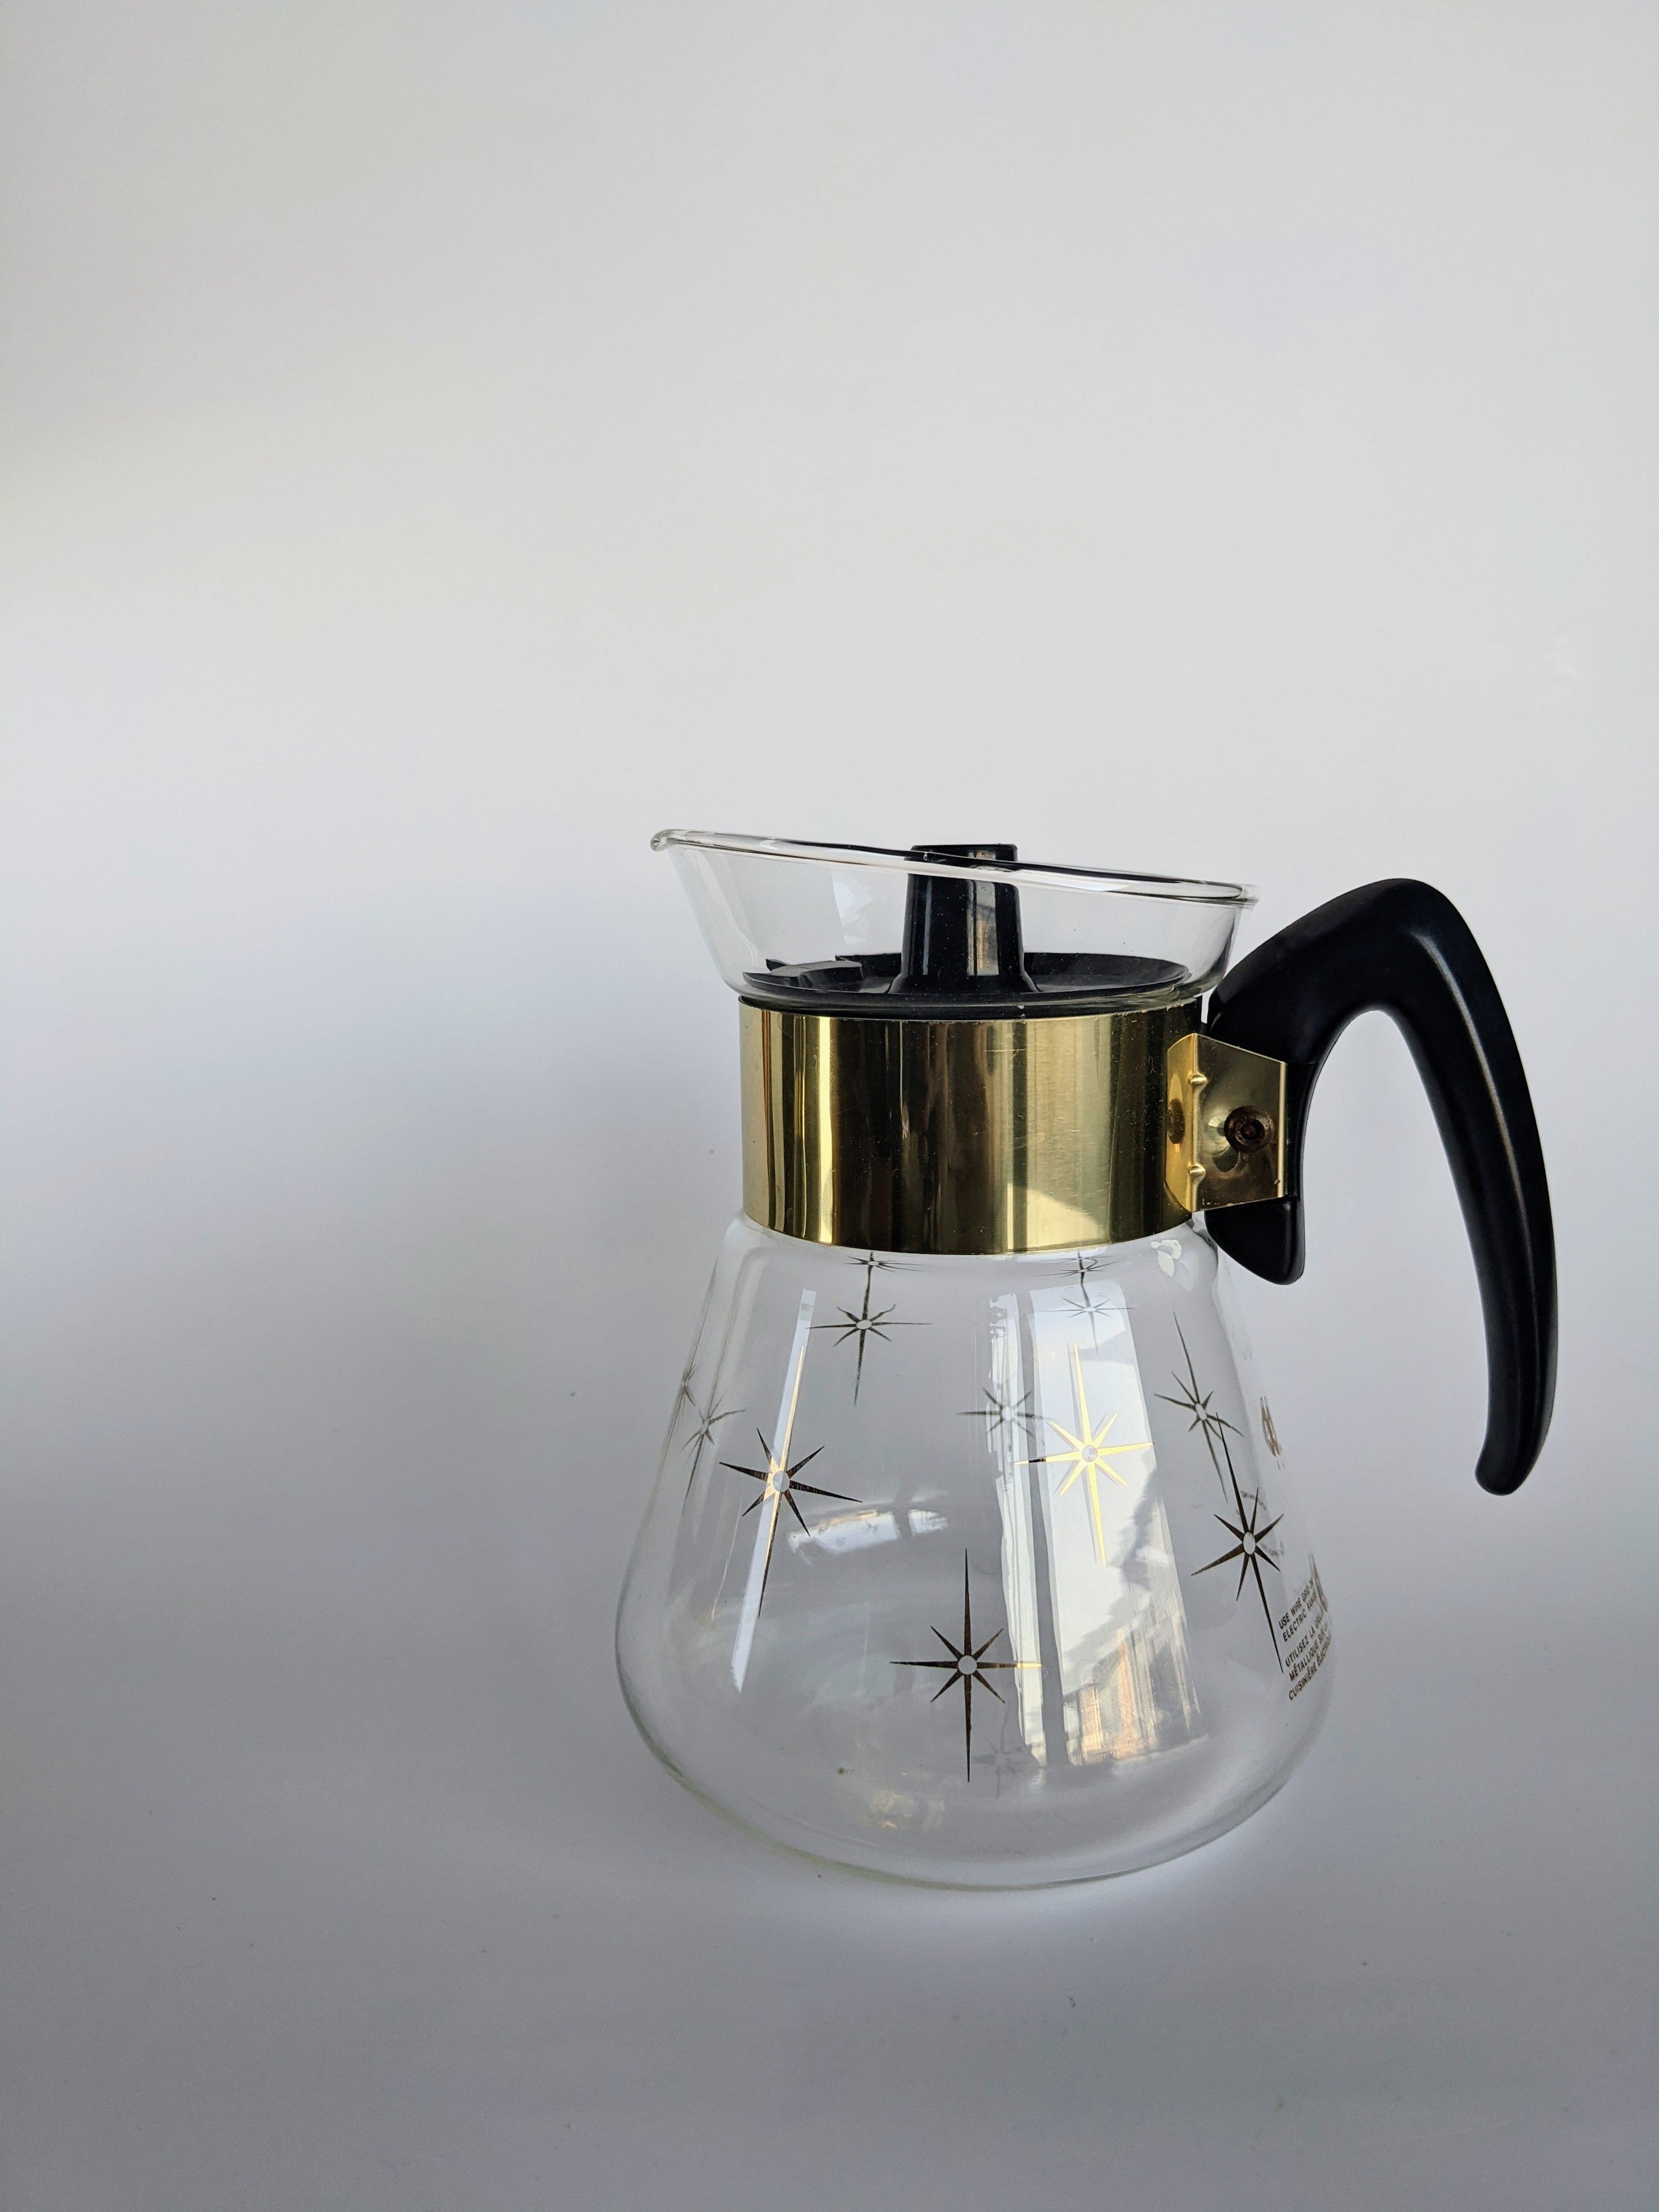 Vintage Pyrex Glass Carafe Coffee Pot – The Stand Alone